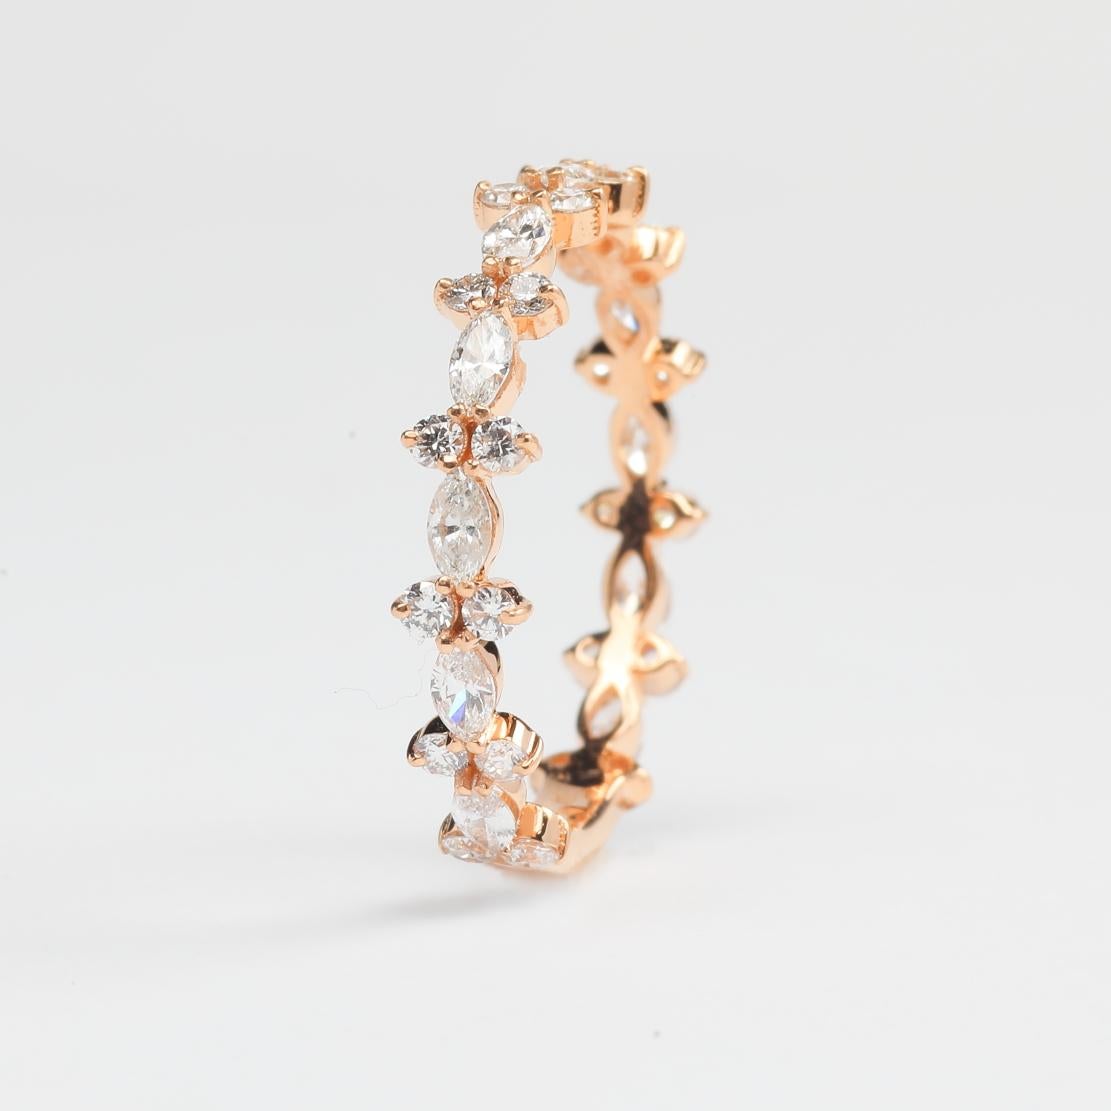 Classy and chic Stackable Diamond Band Ring, featuring:
✧ Prong set natural diamonds weighing 0.50 tcw  (F-G color, VS clarity) 
✧ Approximately 2.10 grams of 18K Rose Gold
✧ Free appraisal included with your purchase
✧ Comes with beautiful